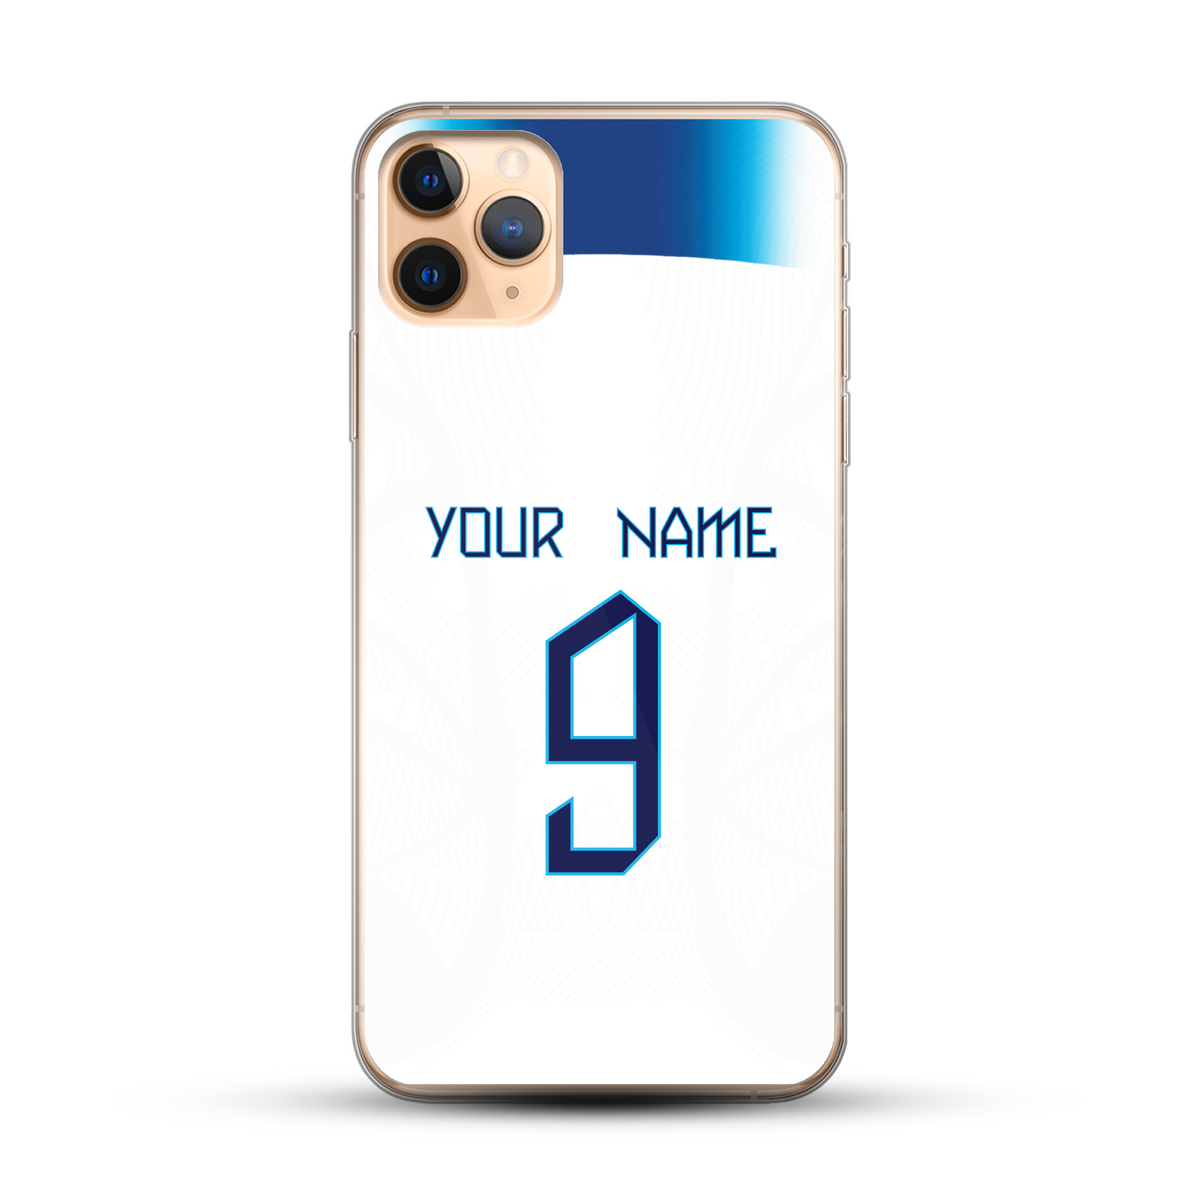 England 2022 (World Cup) - Home Kit Phone Case